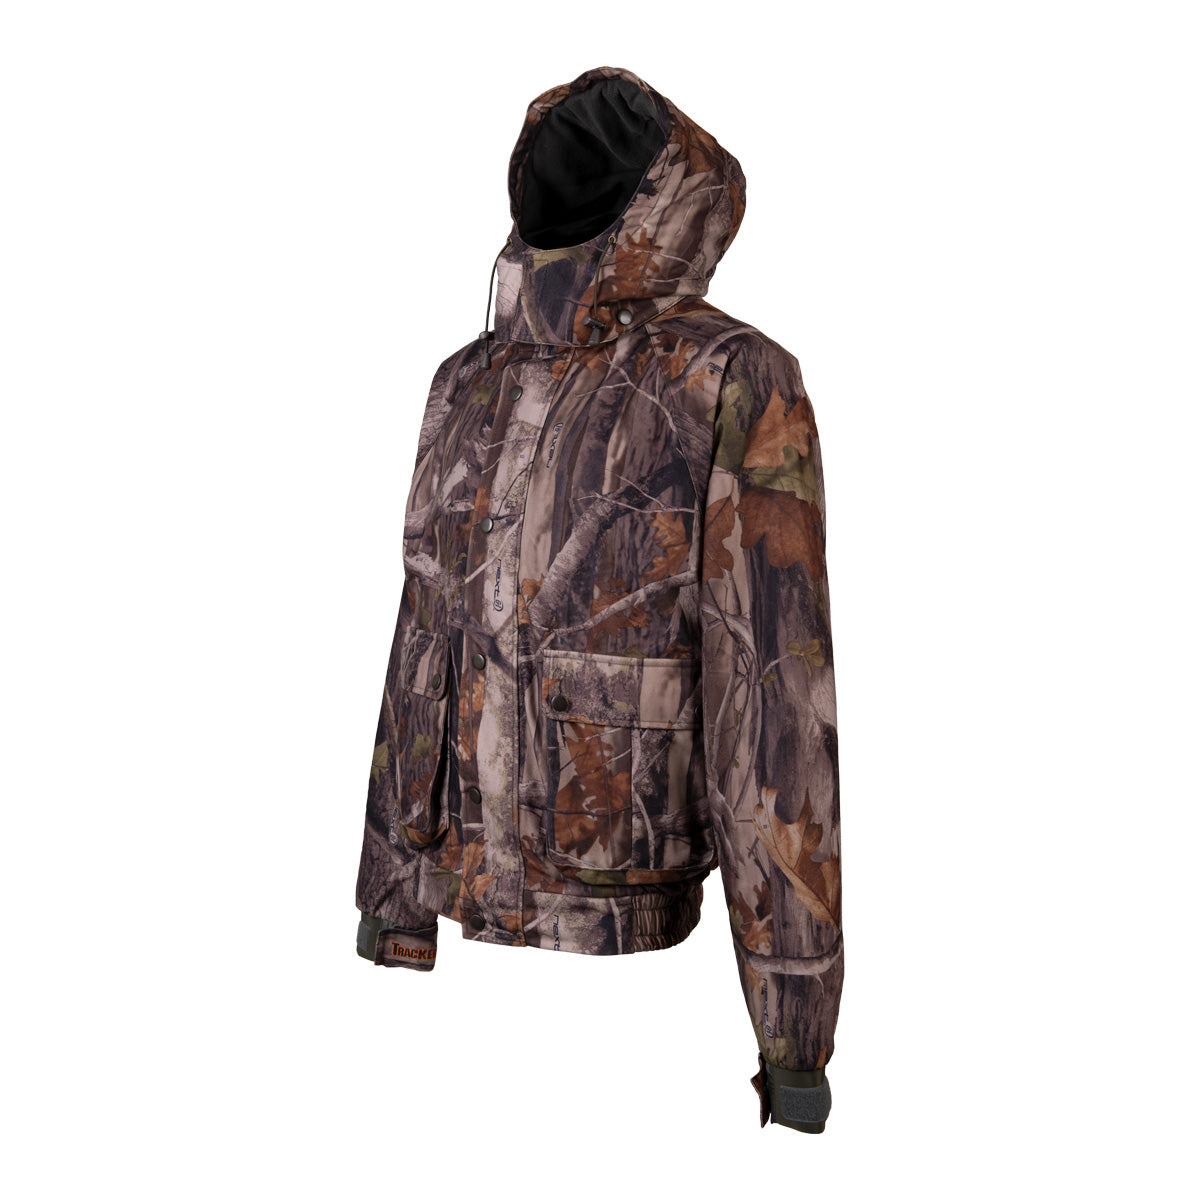 TRACKER "Next G1" Hunting Set - Insulated